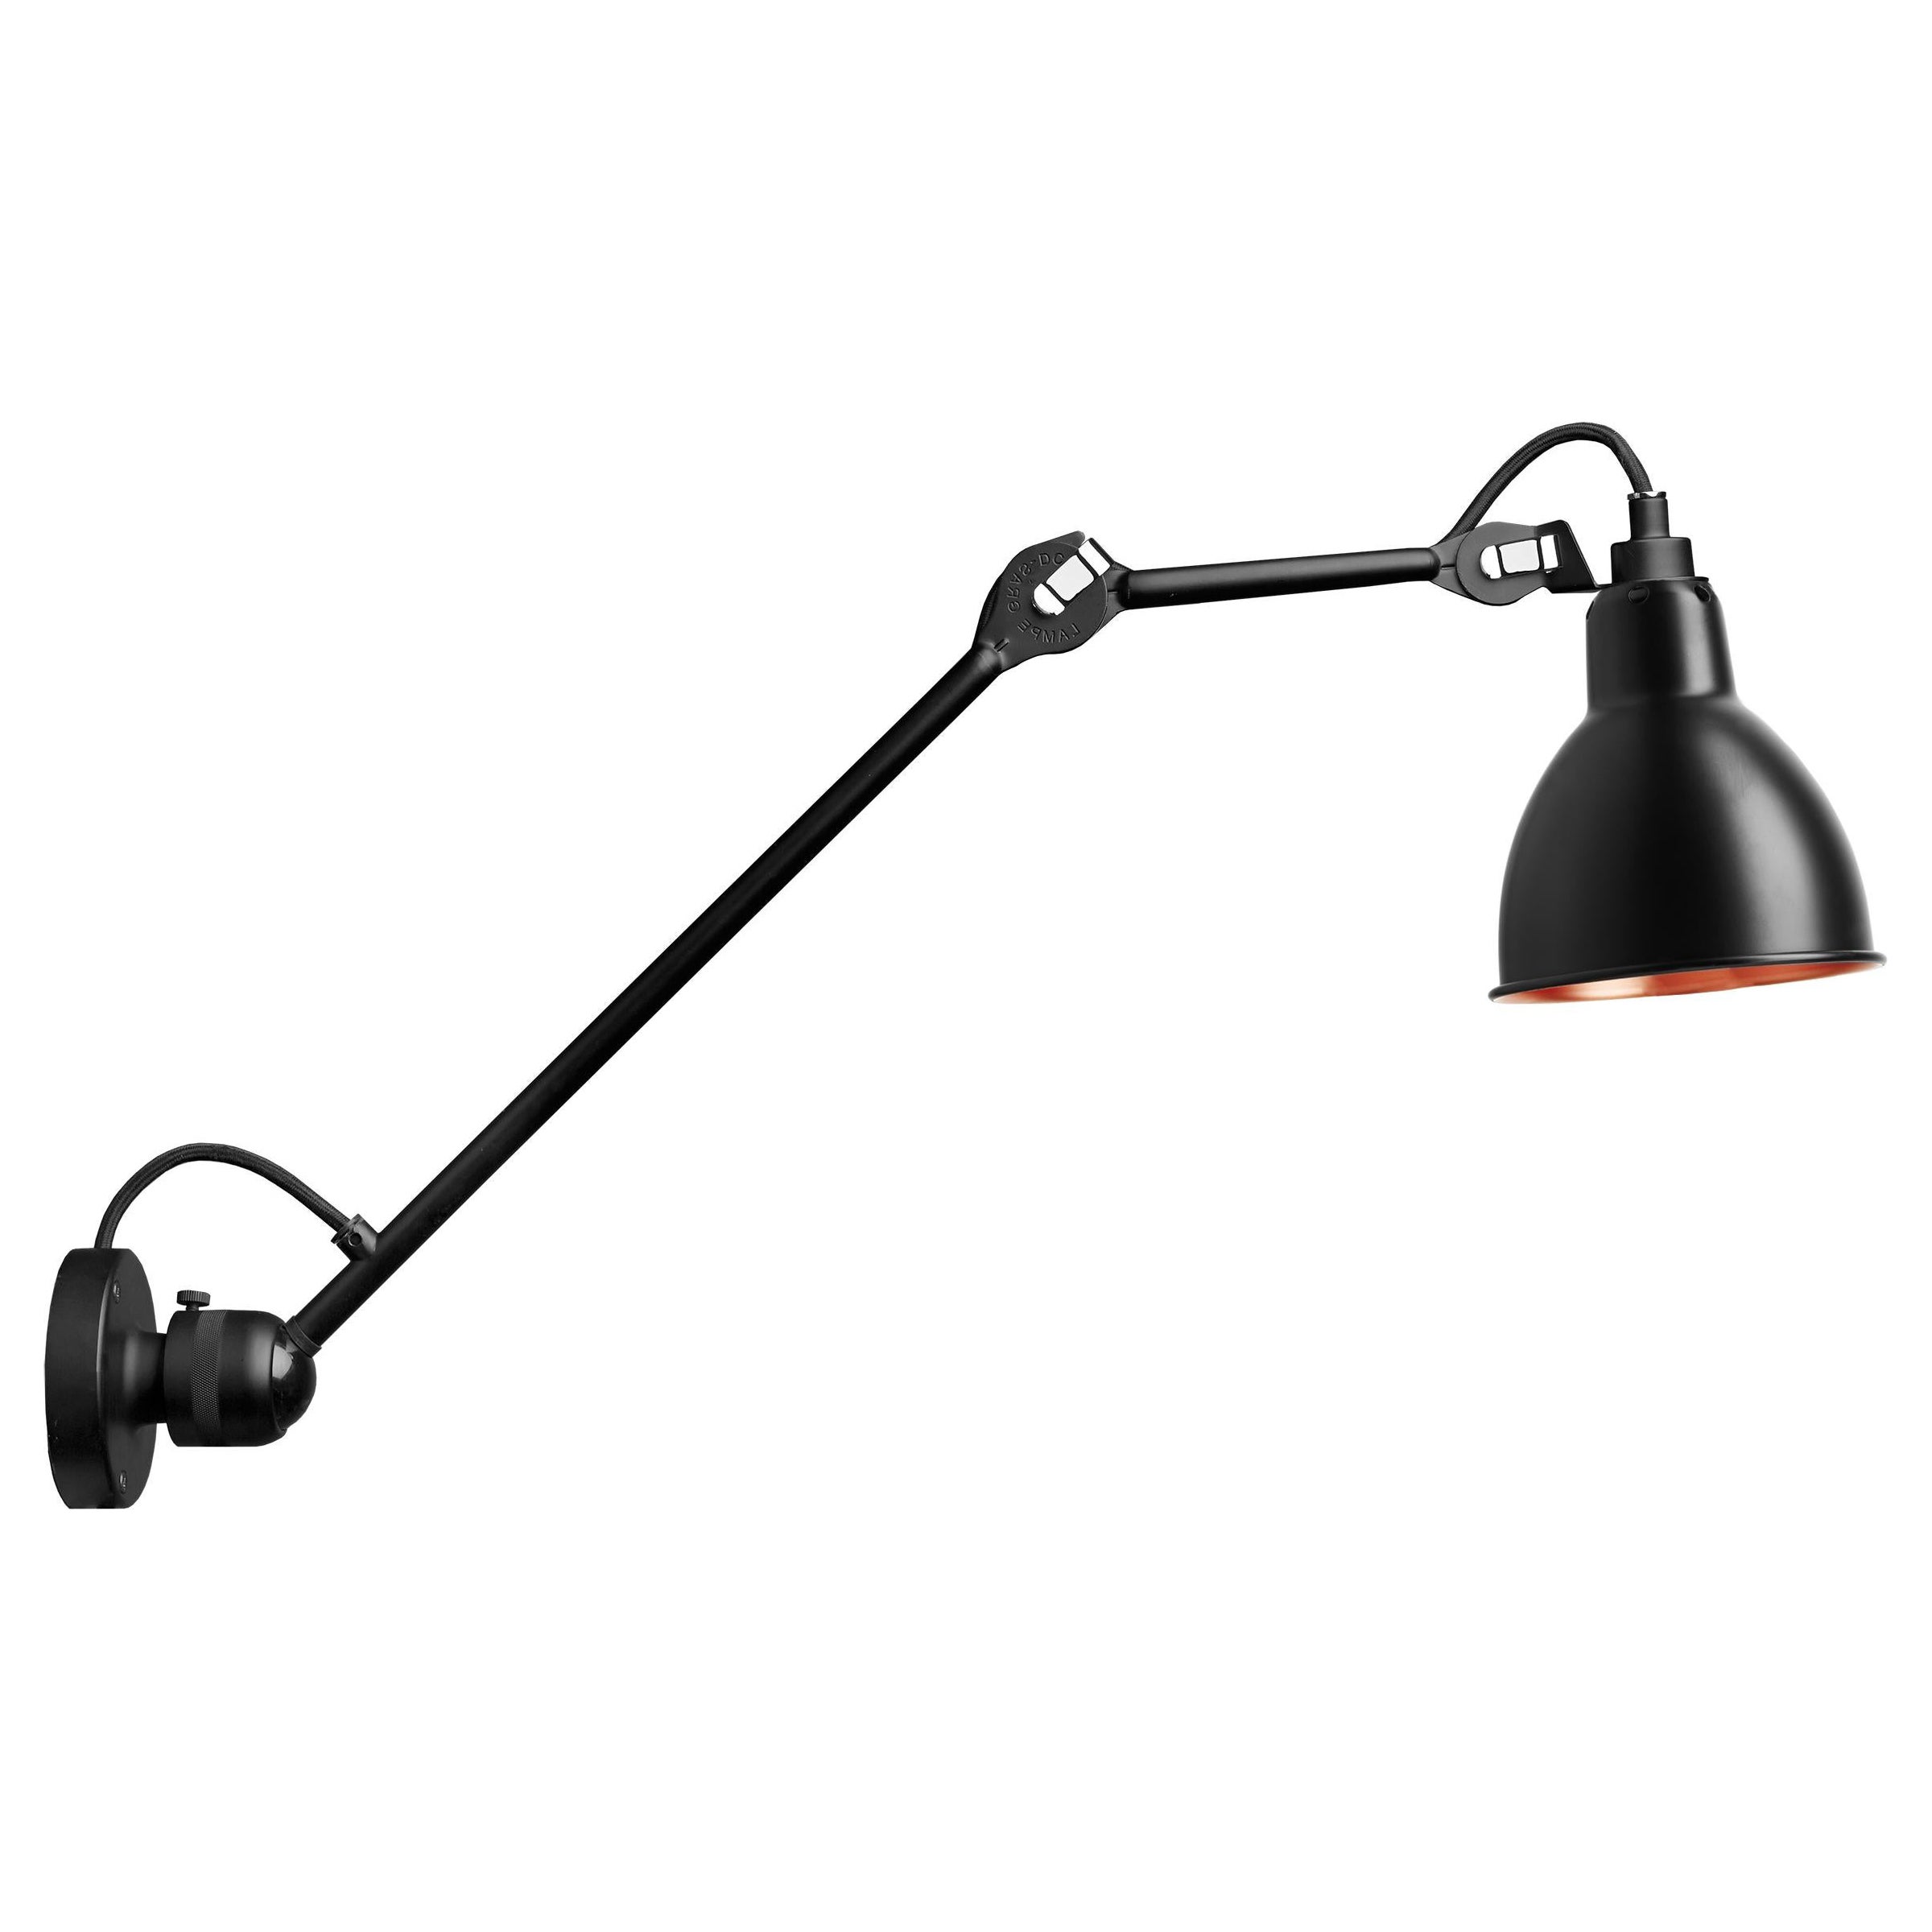 DCW Editions La Lampe Gras N°304 L40 Wall Lamp in Black Arm & Black Copper Shade For Sale